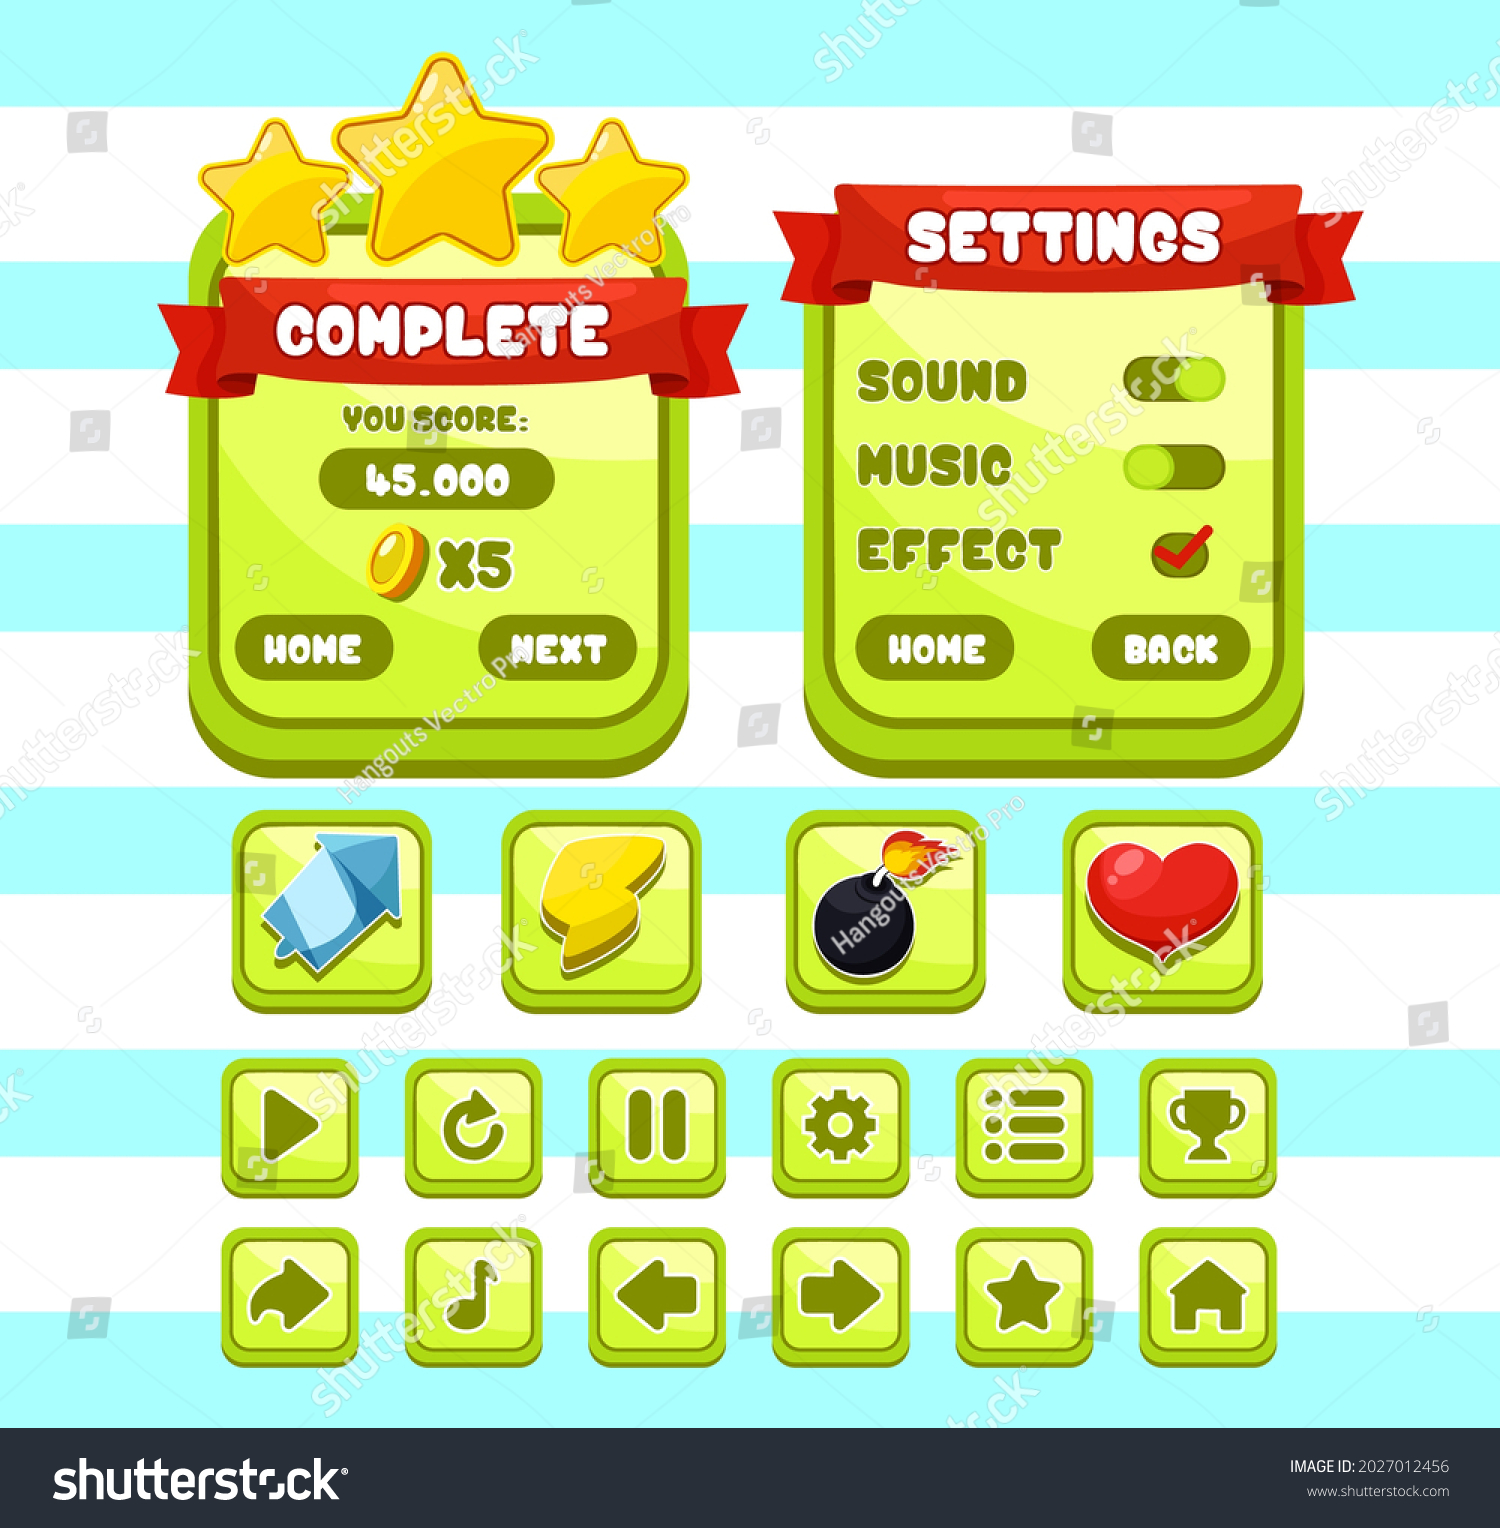 SVG of Button set designed game user interface (GUI) illustration for console and computer. Vector asset for creating medieval video and computer game. RPG, strategy, shooting, racing, fighting, simulation svg